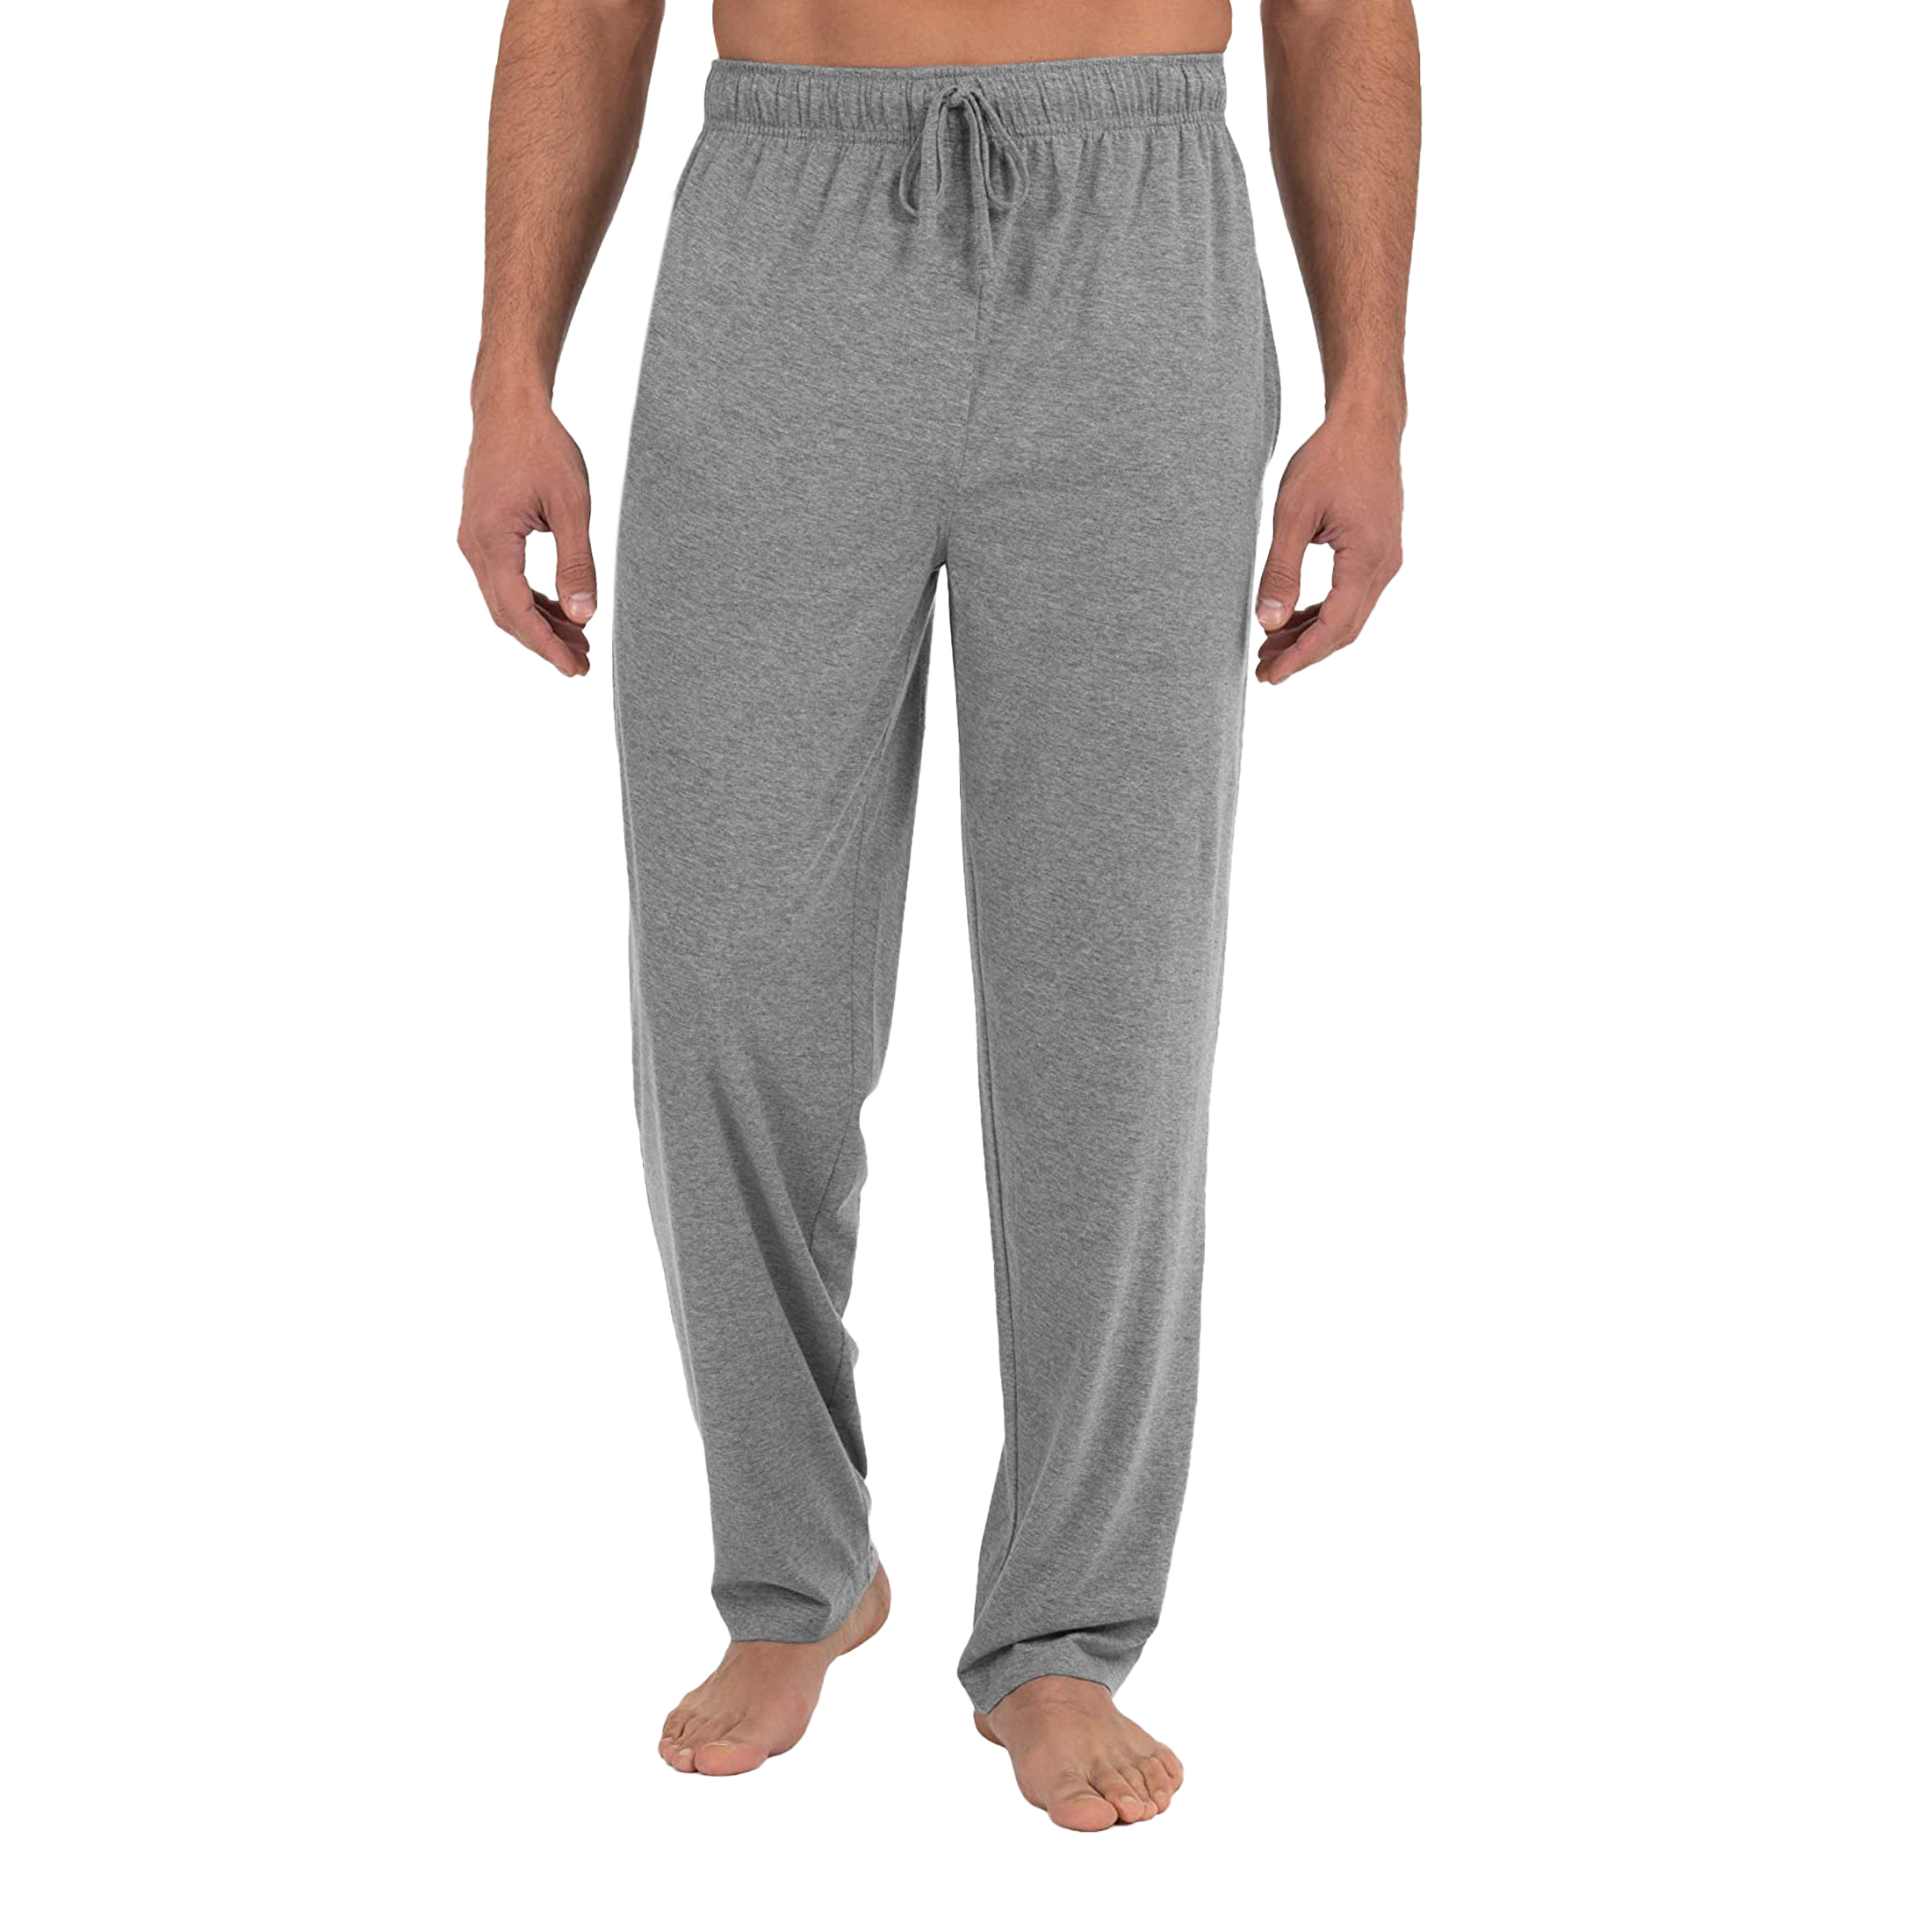 Men's Soft Jersey Knit Long Lounge Sleep Pants With Pockets - Solid, Large